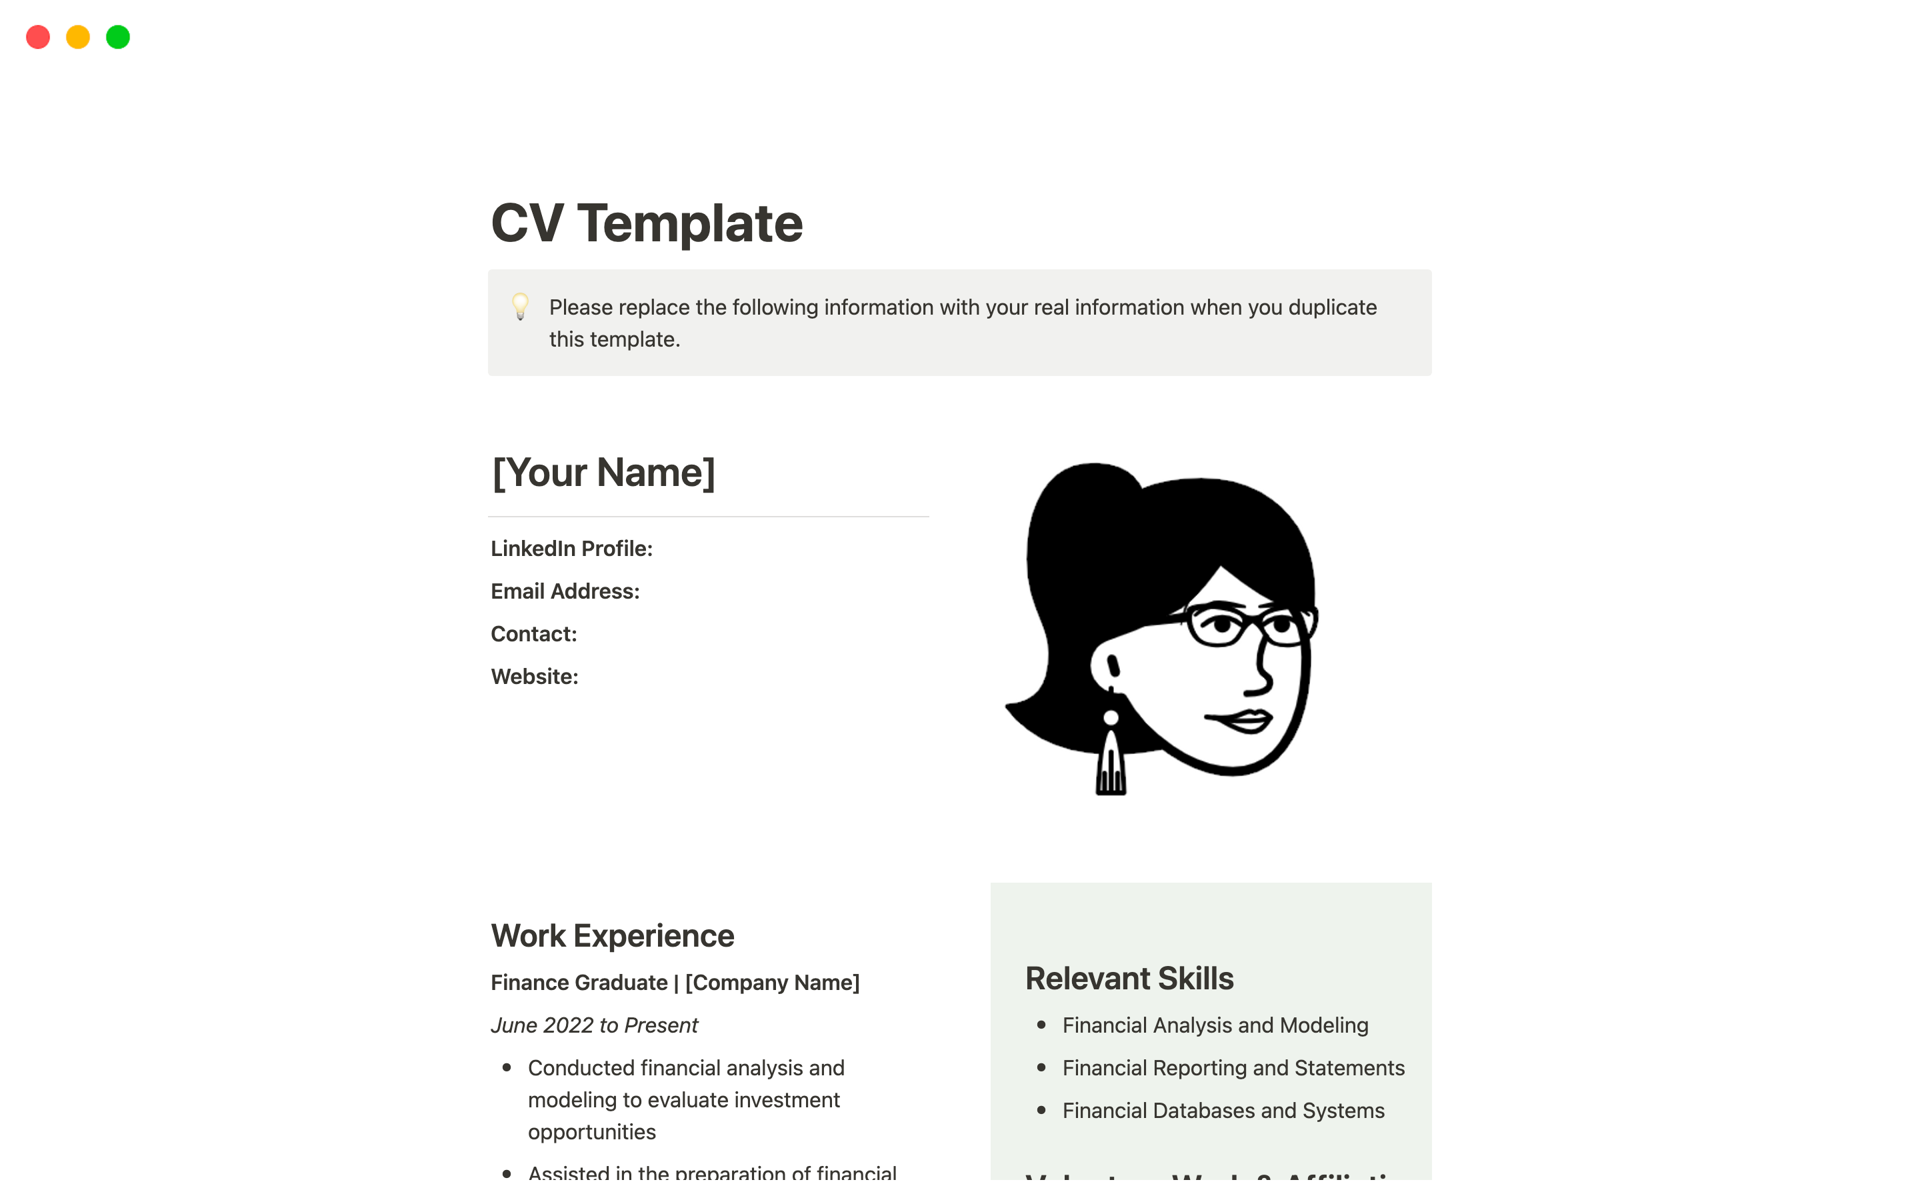 A template preview for CV Resume